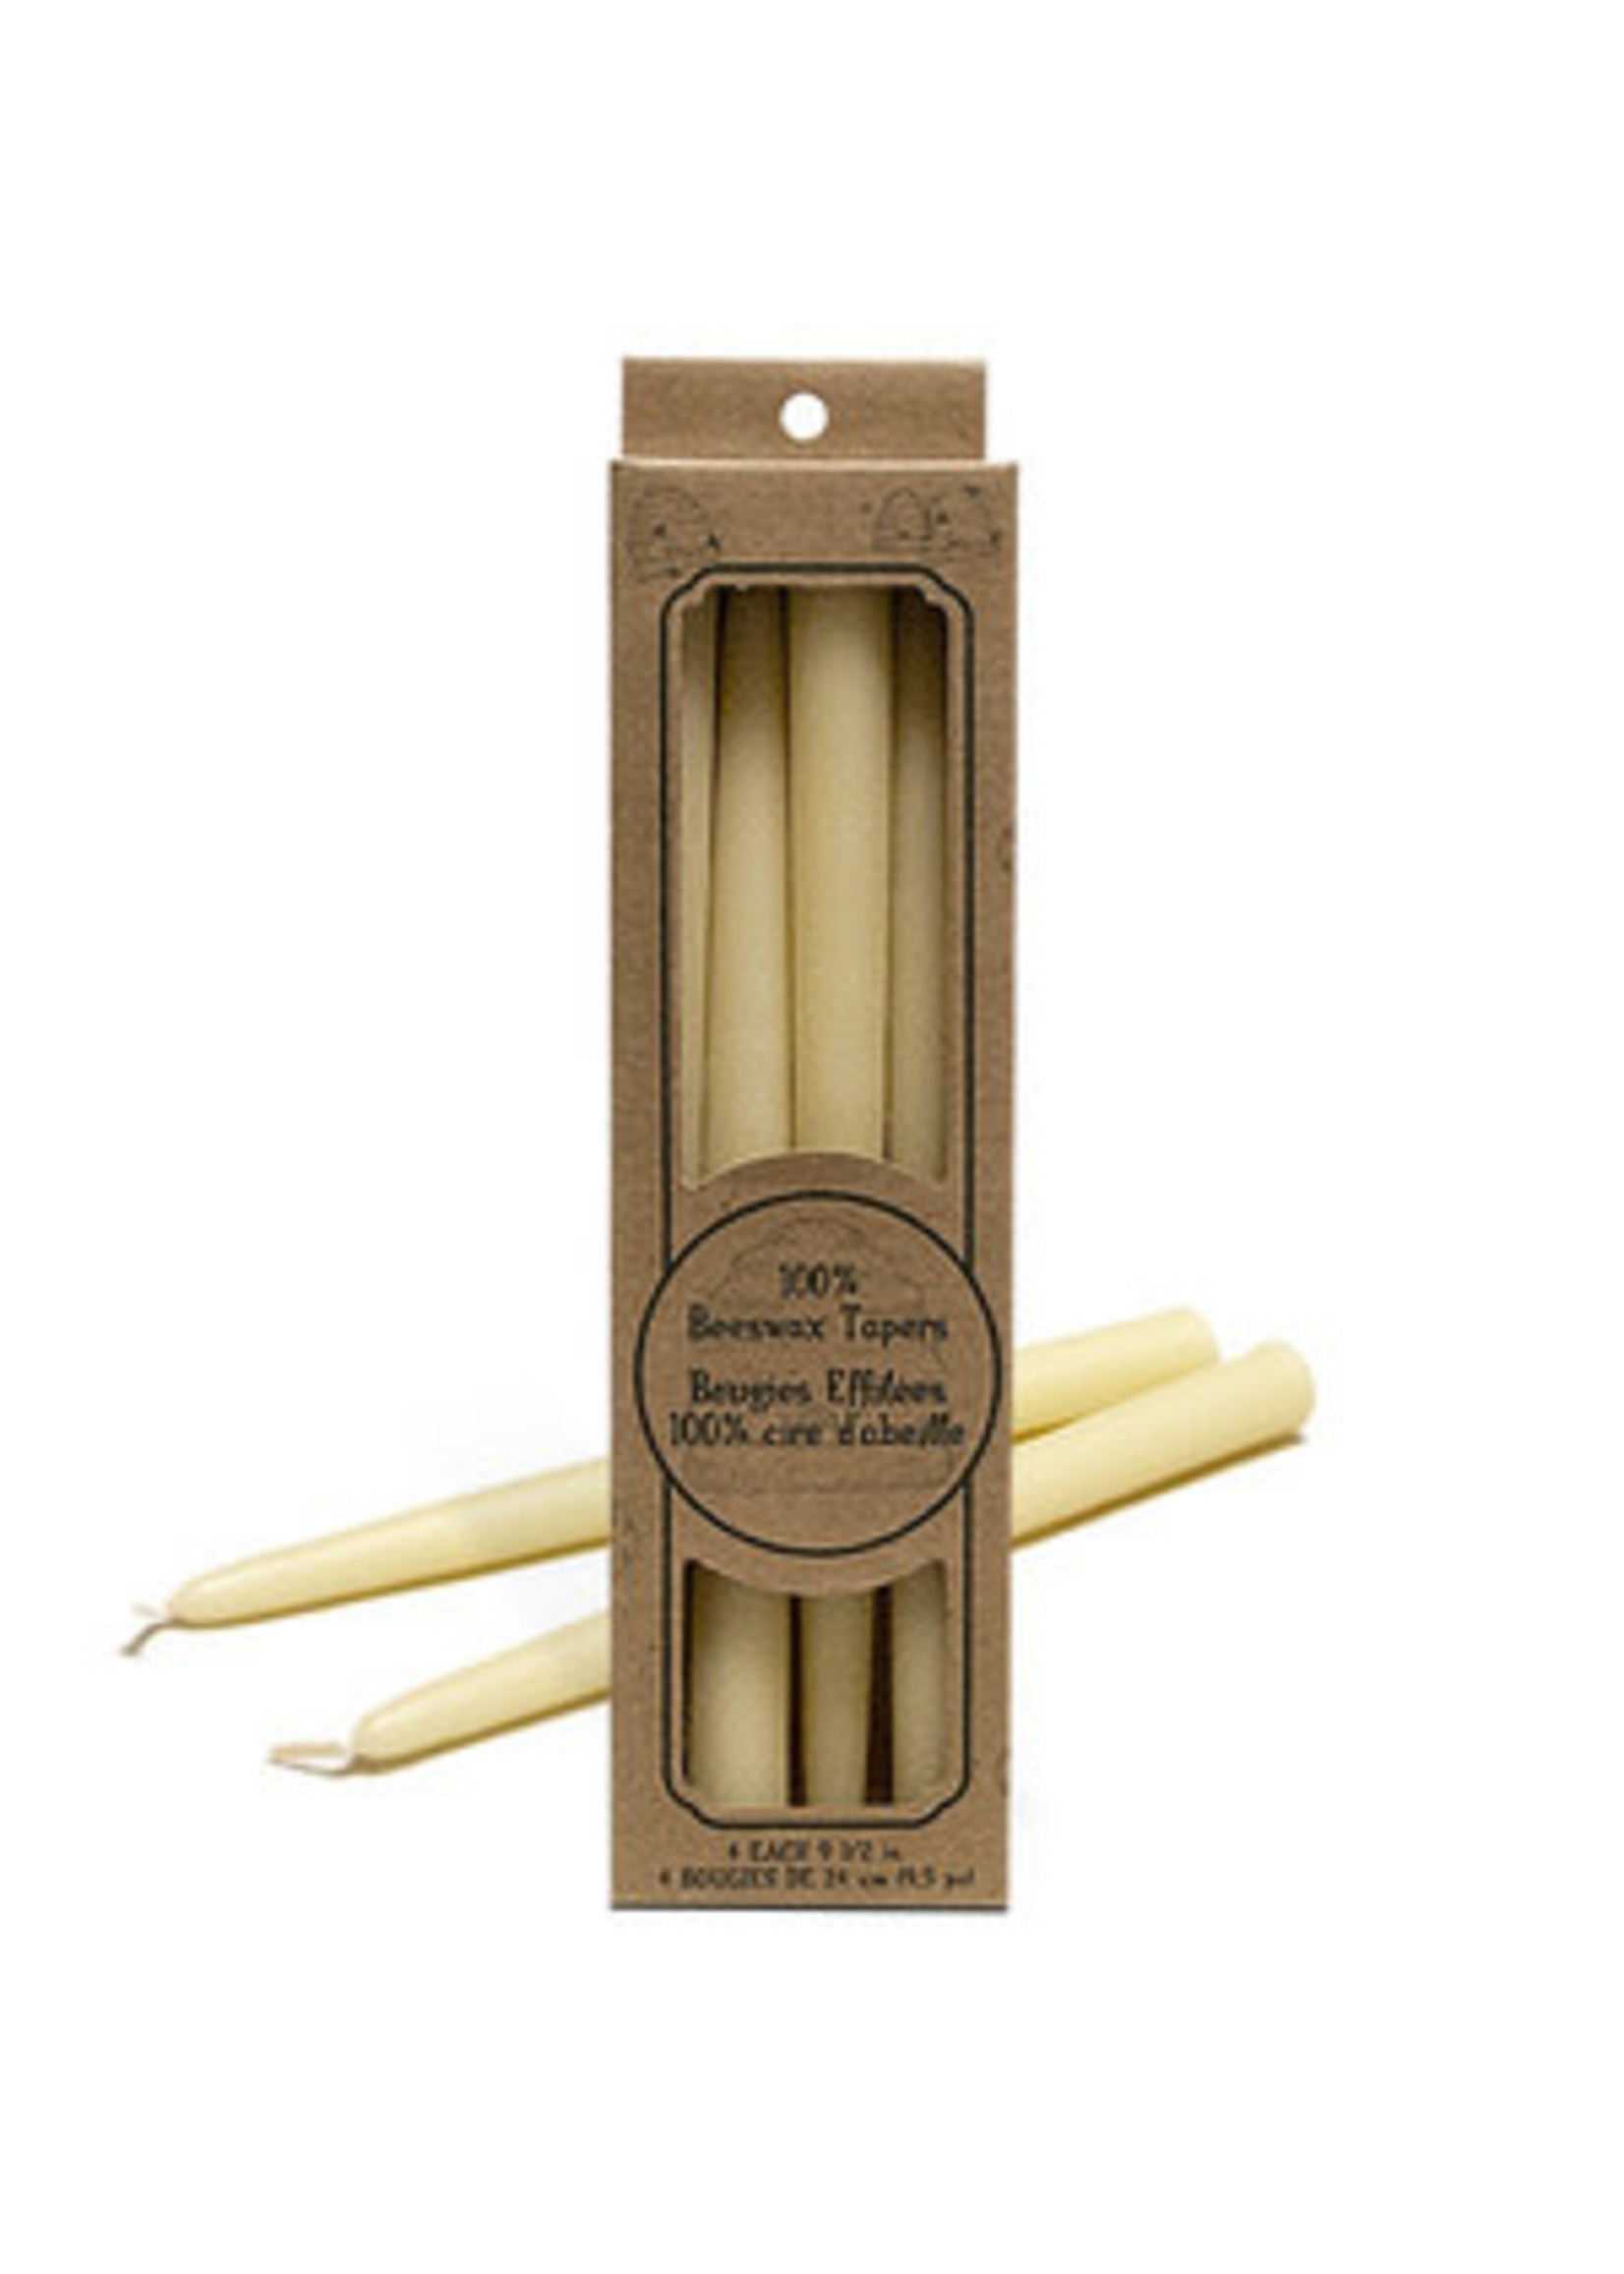 100% Beeswax Tapers 10" (box of 4)